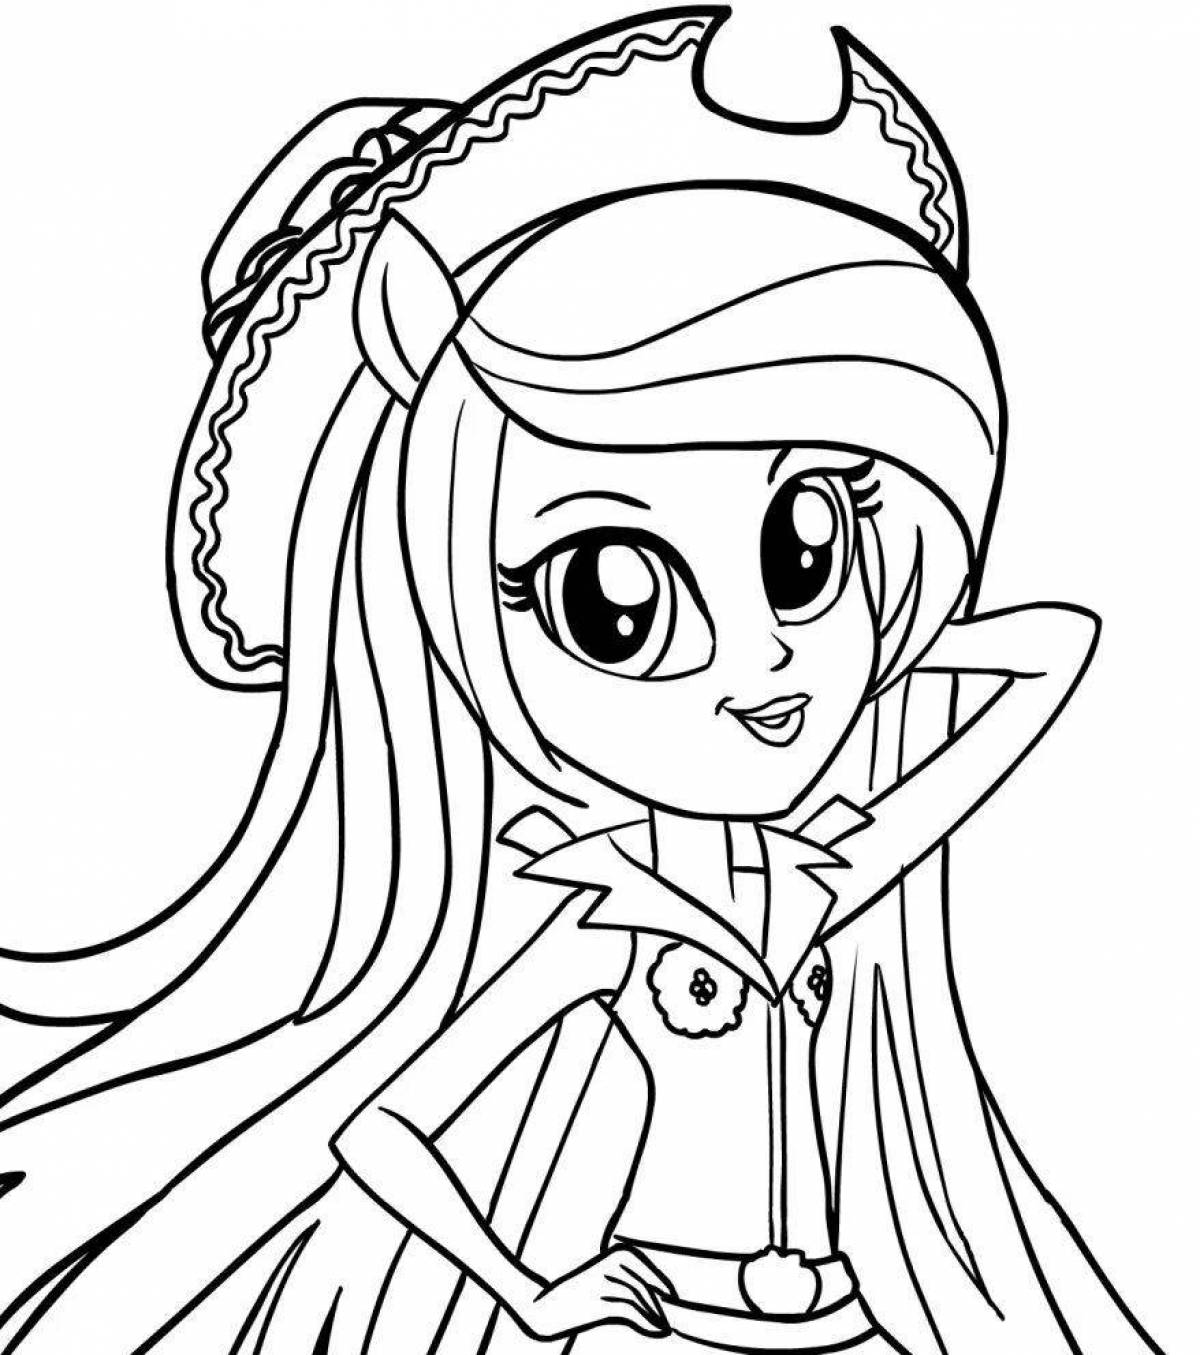 Radiant coloring page my little pony people